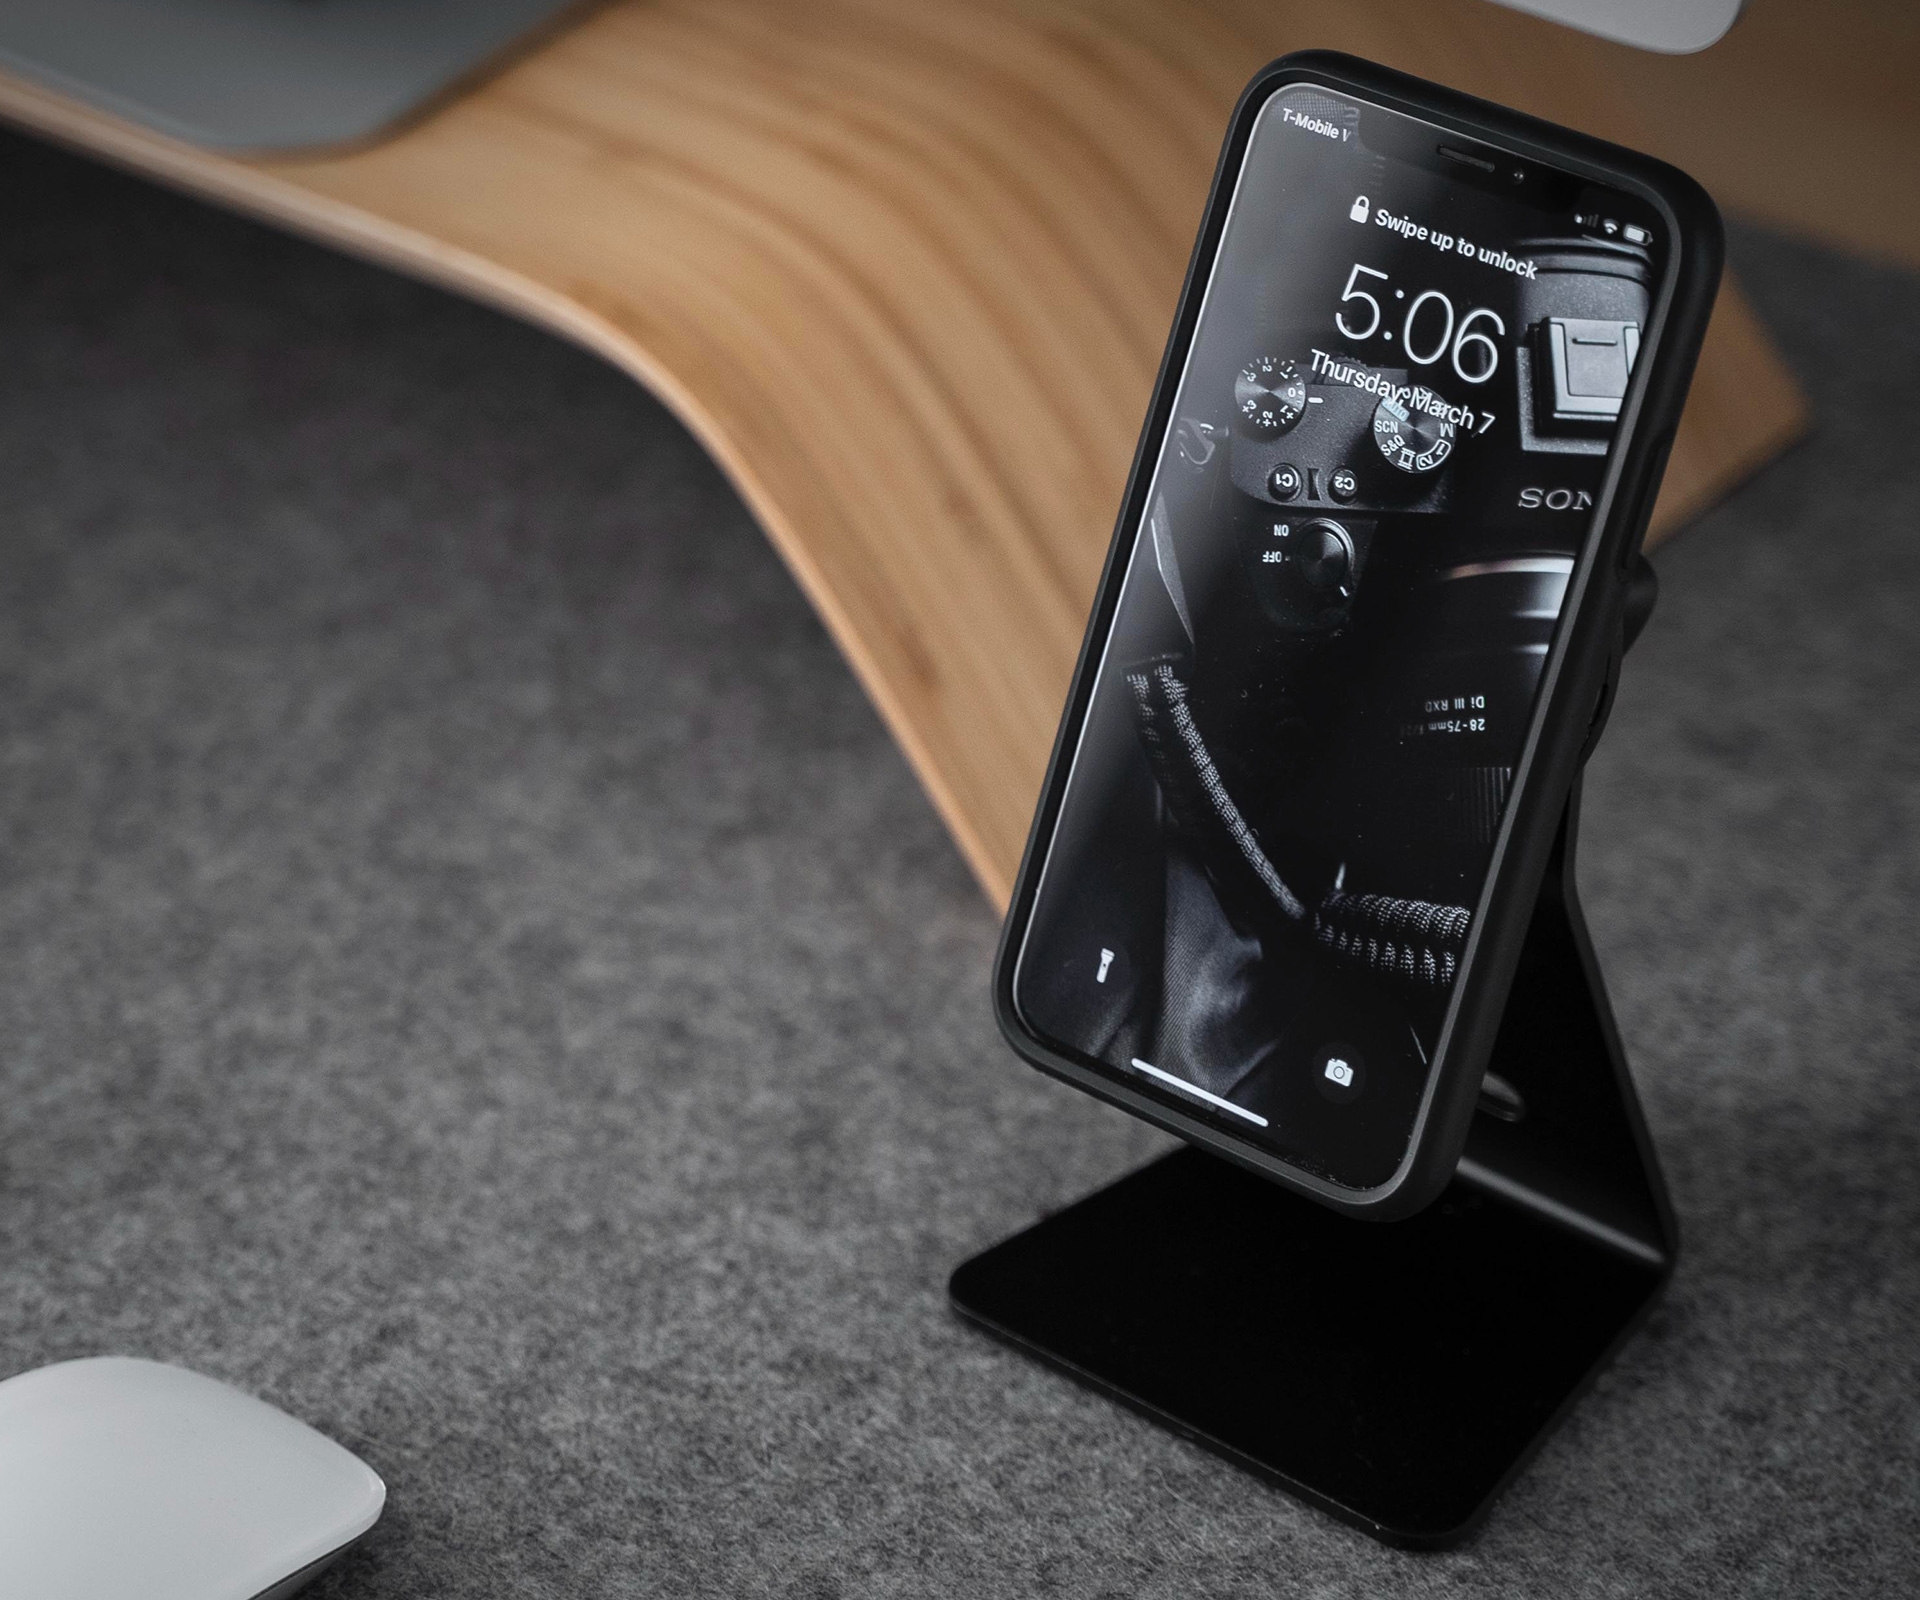 iPhone on wireless charging stand | DeviceDaily.com